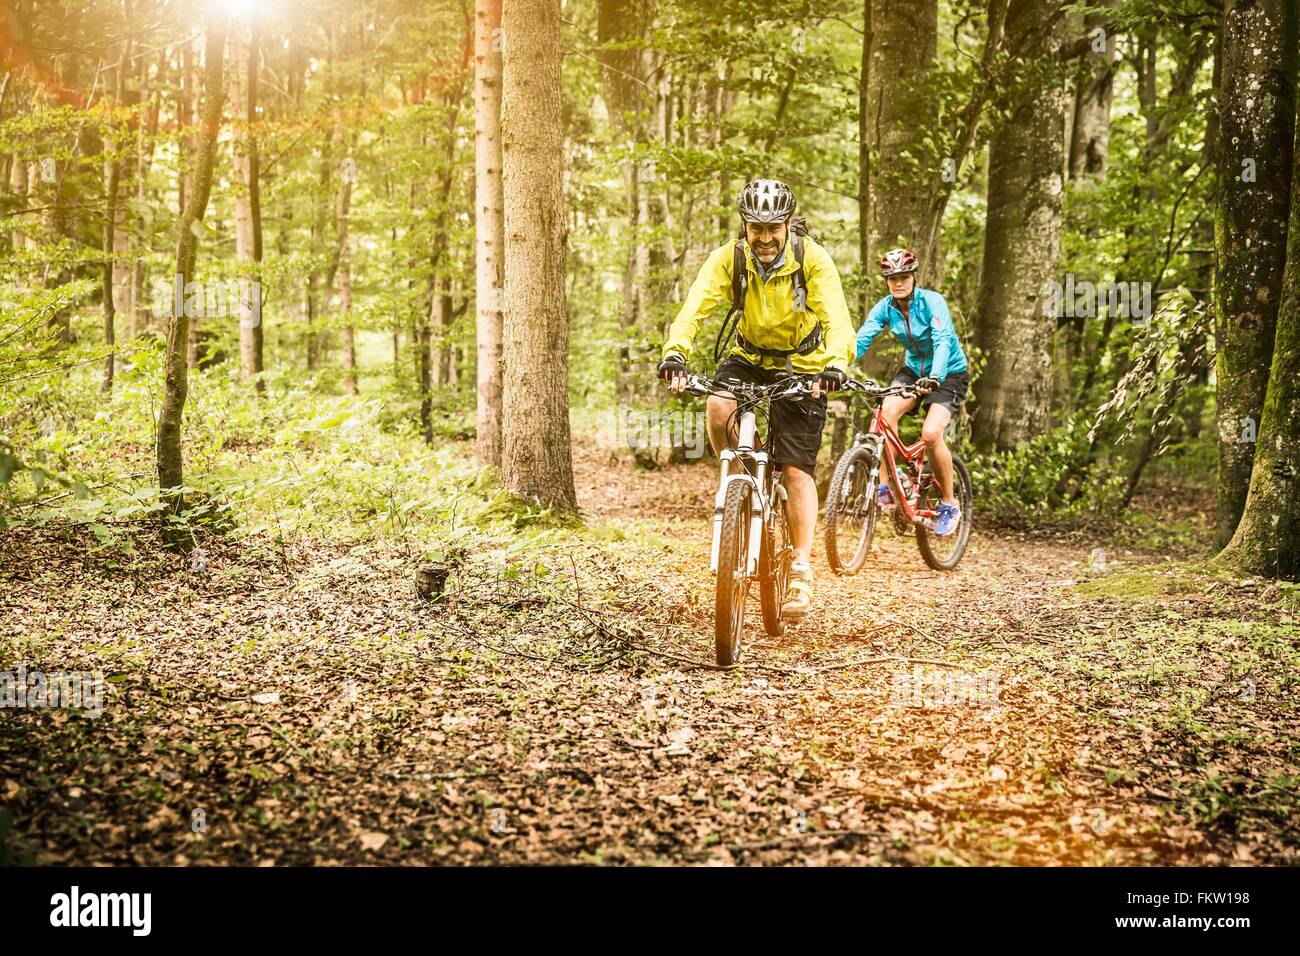 Mature mountain biking couple cycling on forest trail Stock Photo